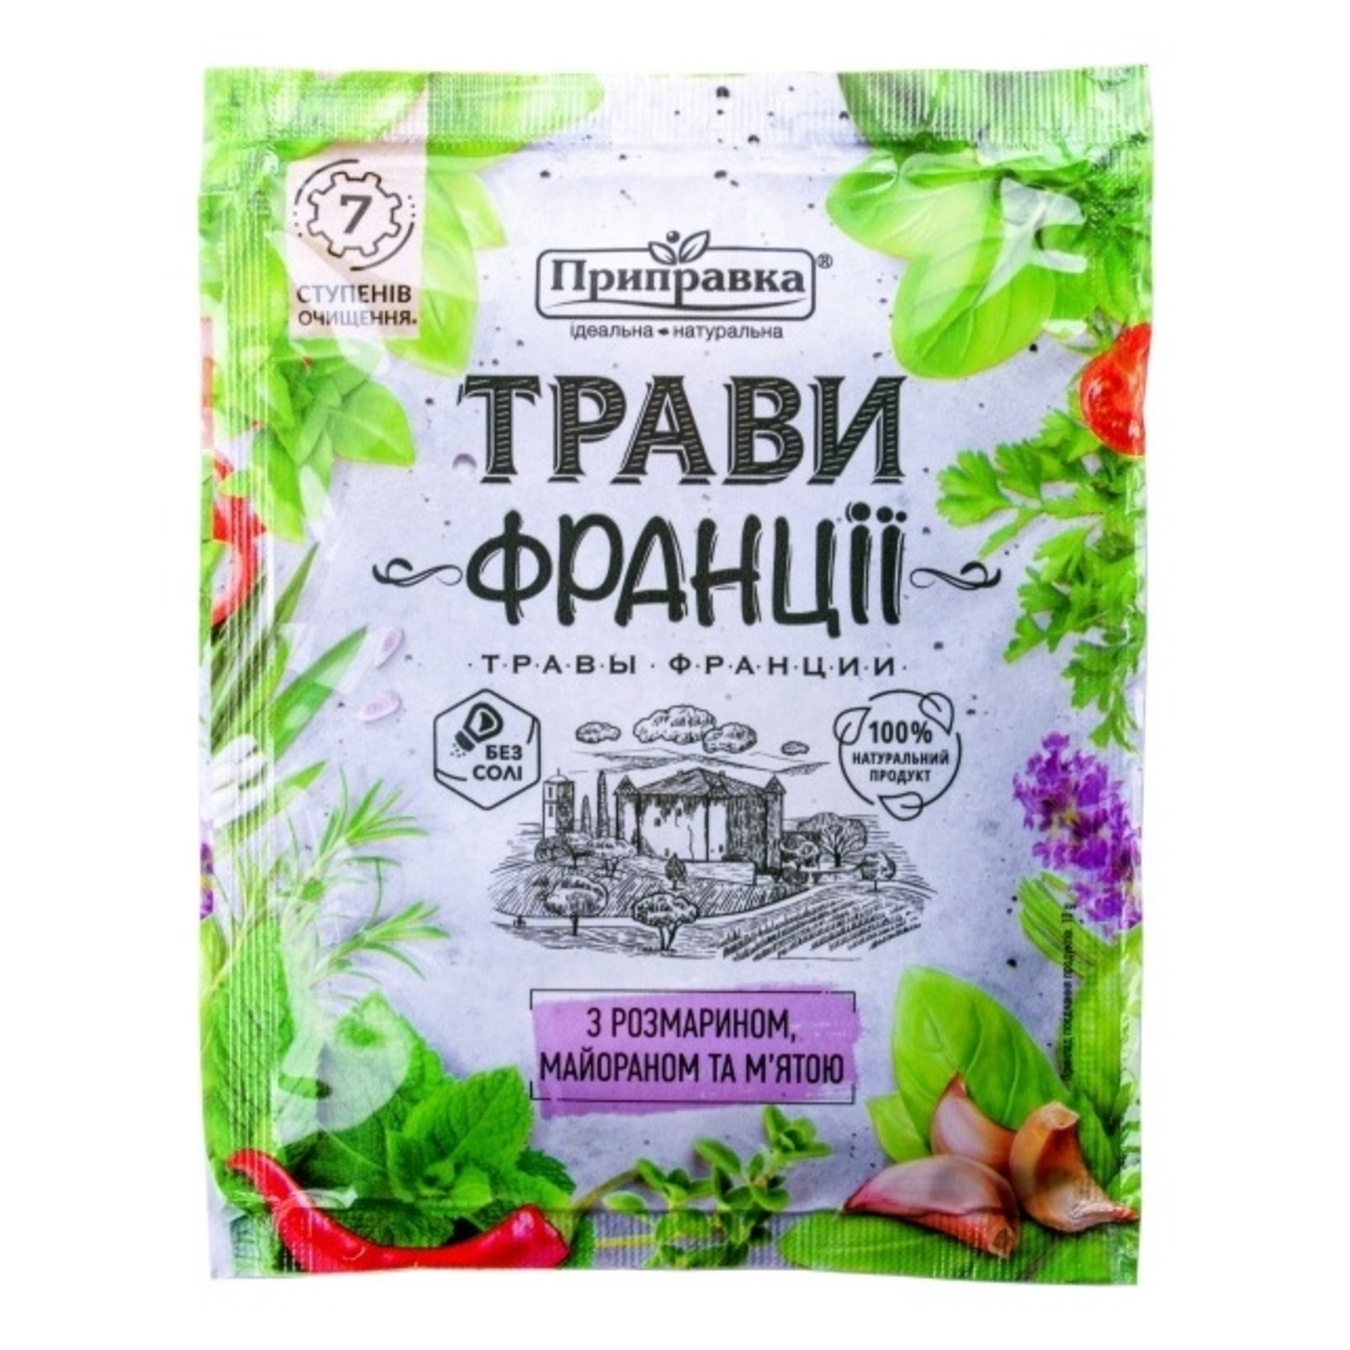 Pripravka herb mix with rosemary, marjoram and mint Spice 10g